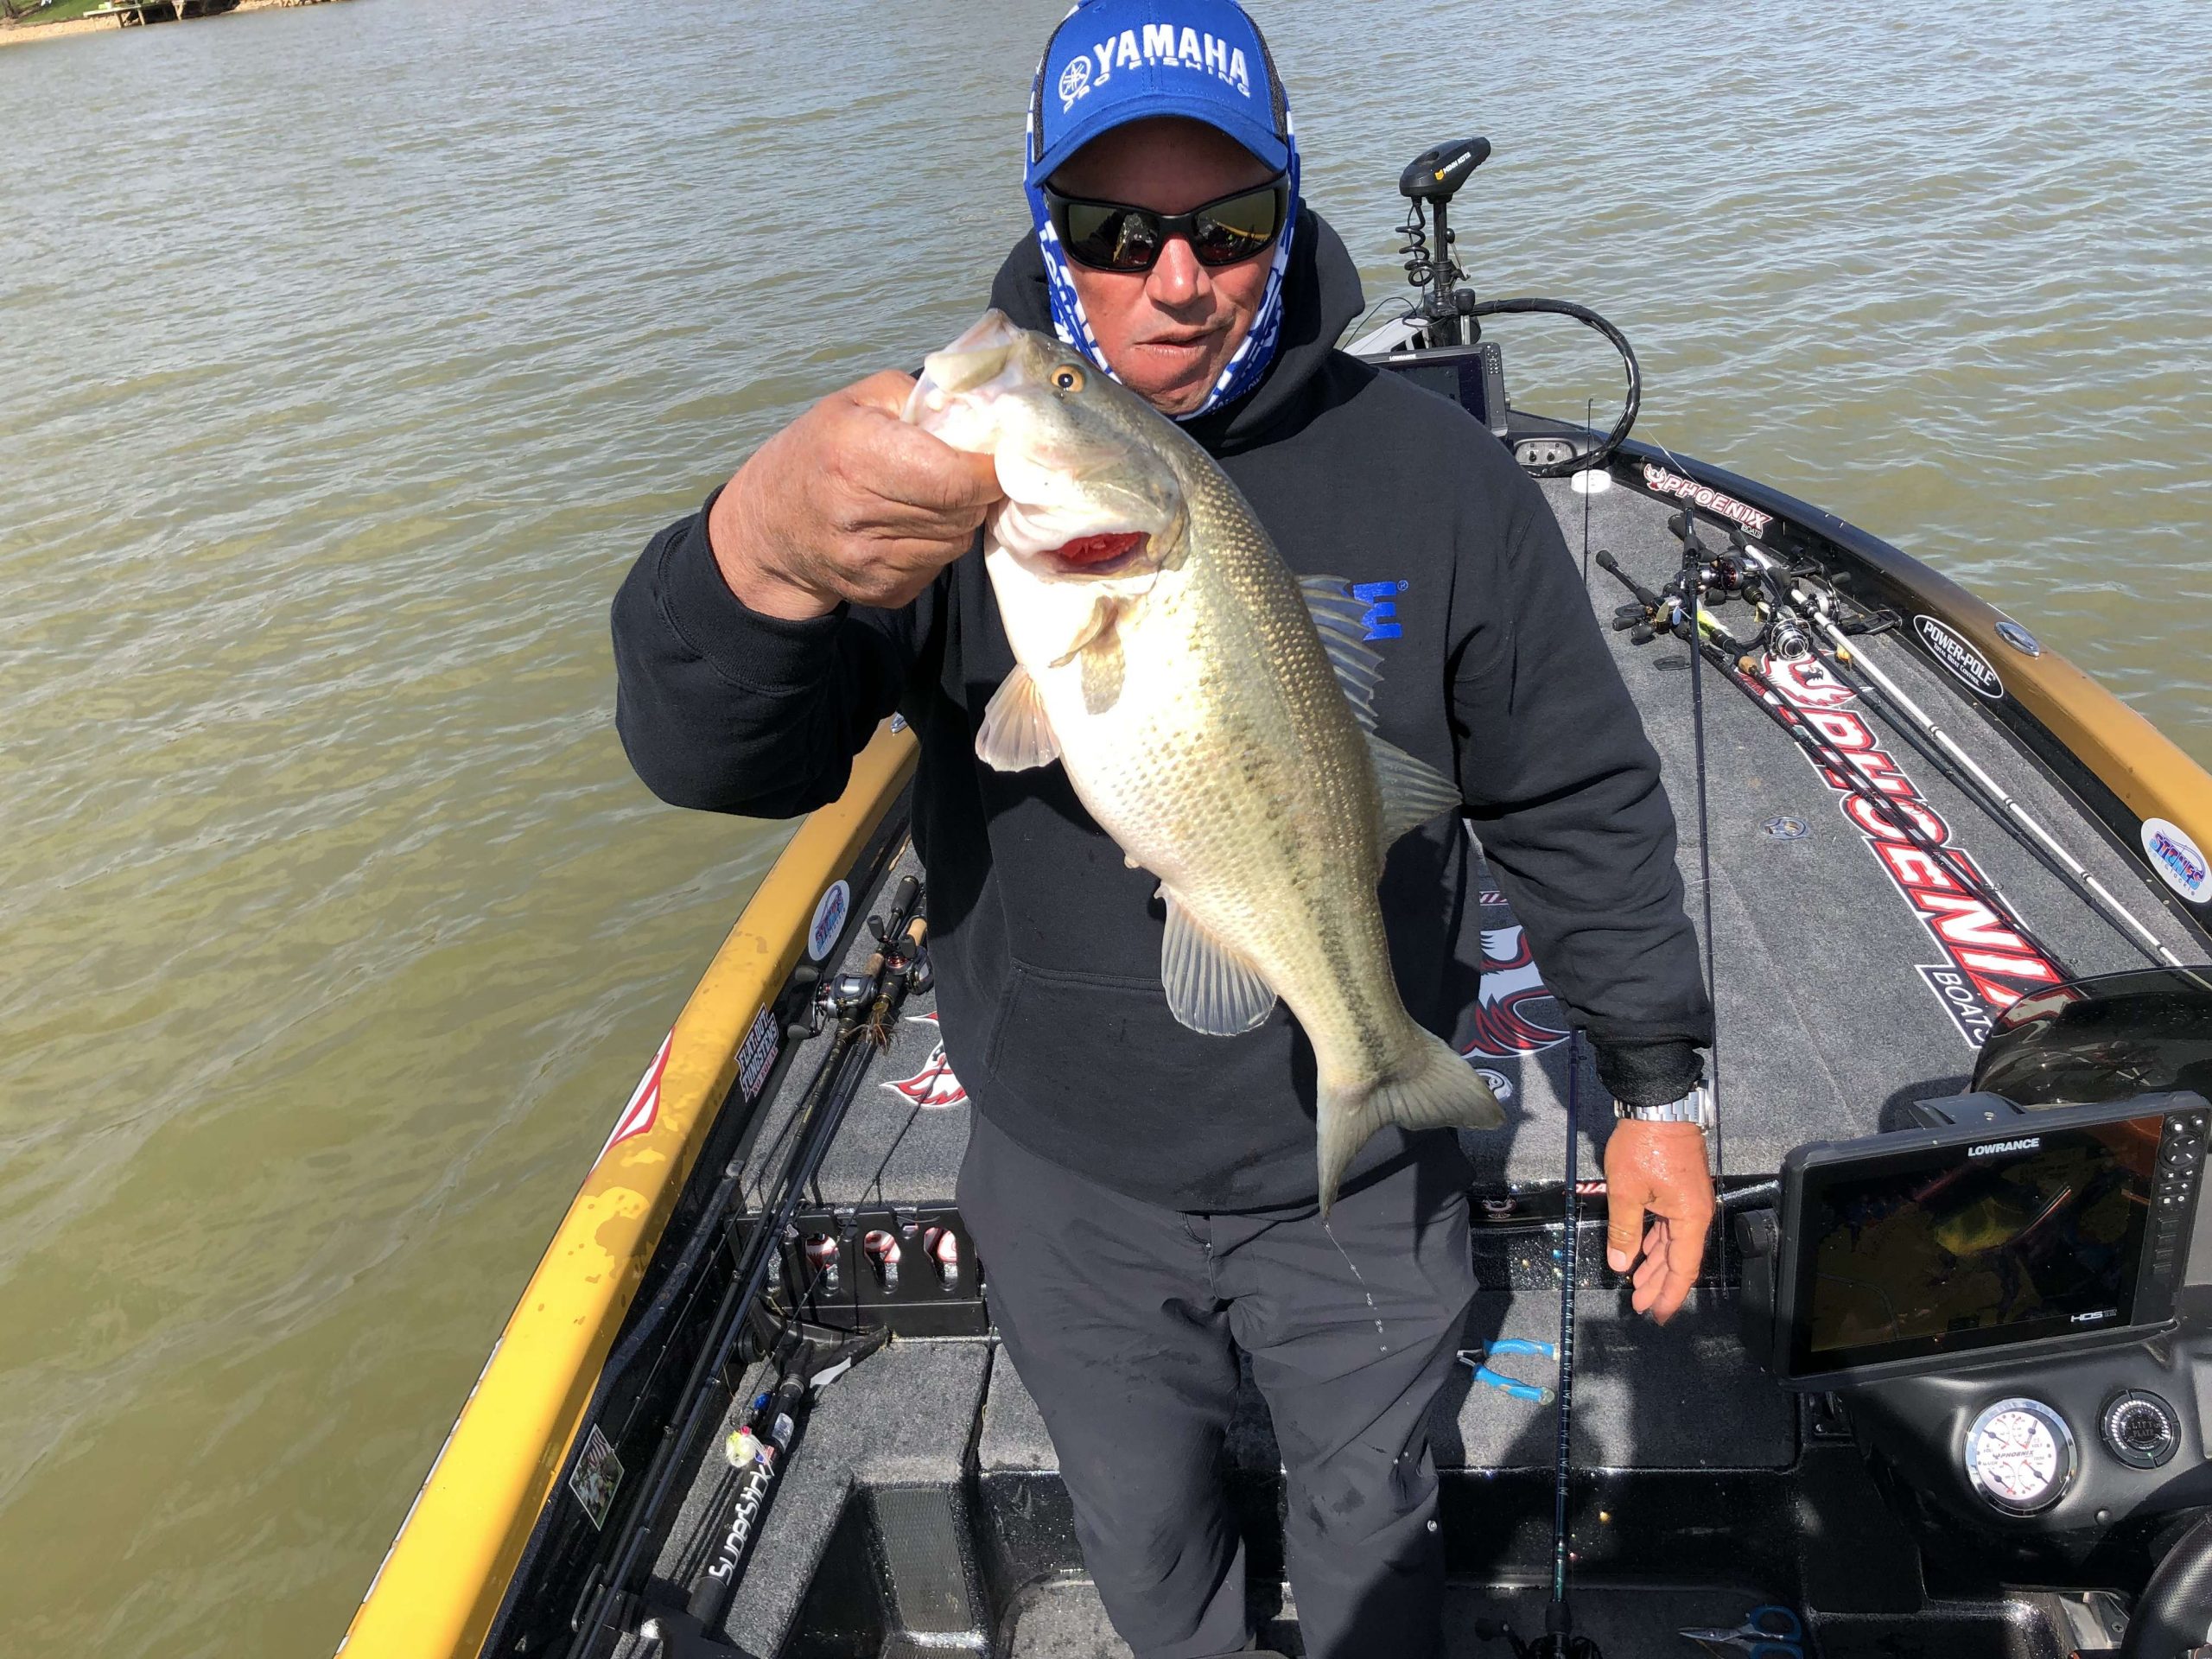 Bobby Lane is continuing to get bites and has boated a few more short fish.  So far this is the best one of the day and makes keeper No. 4.